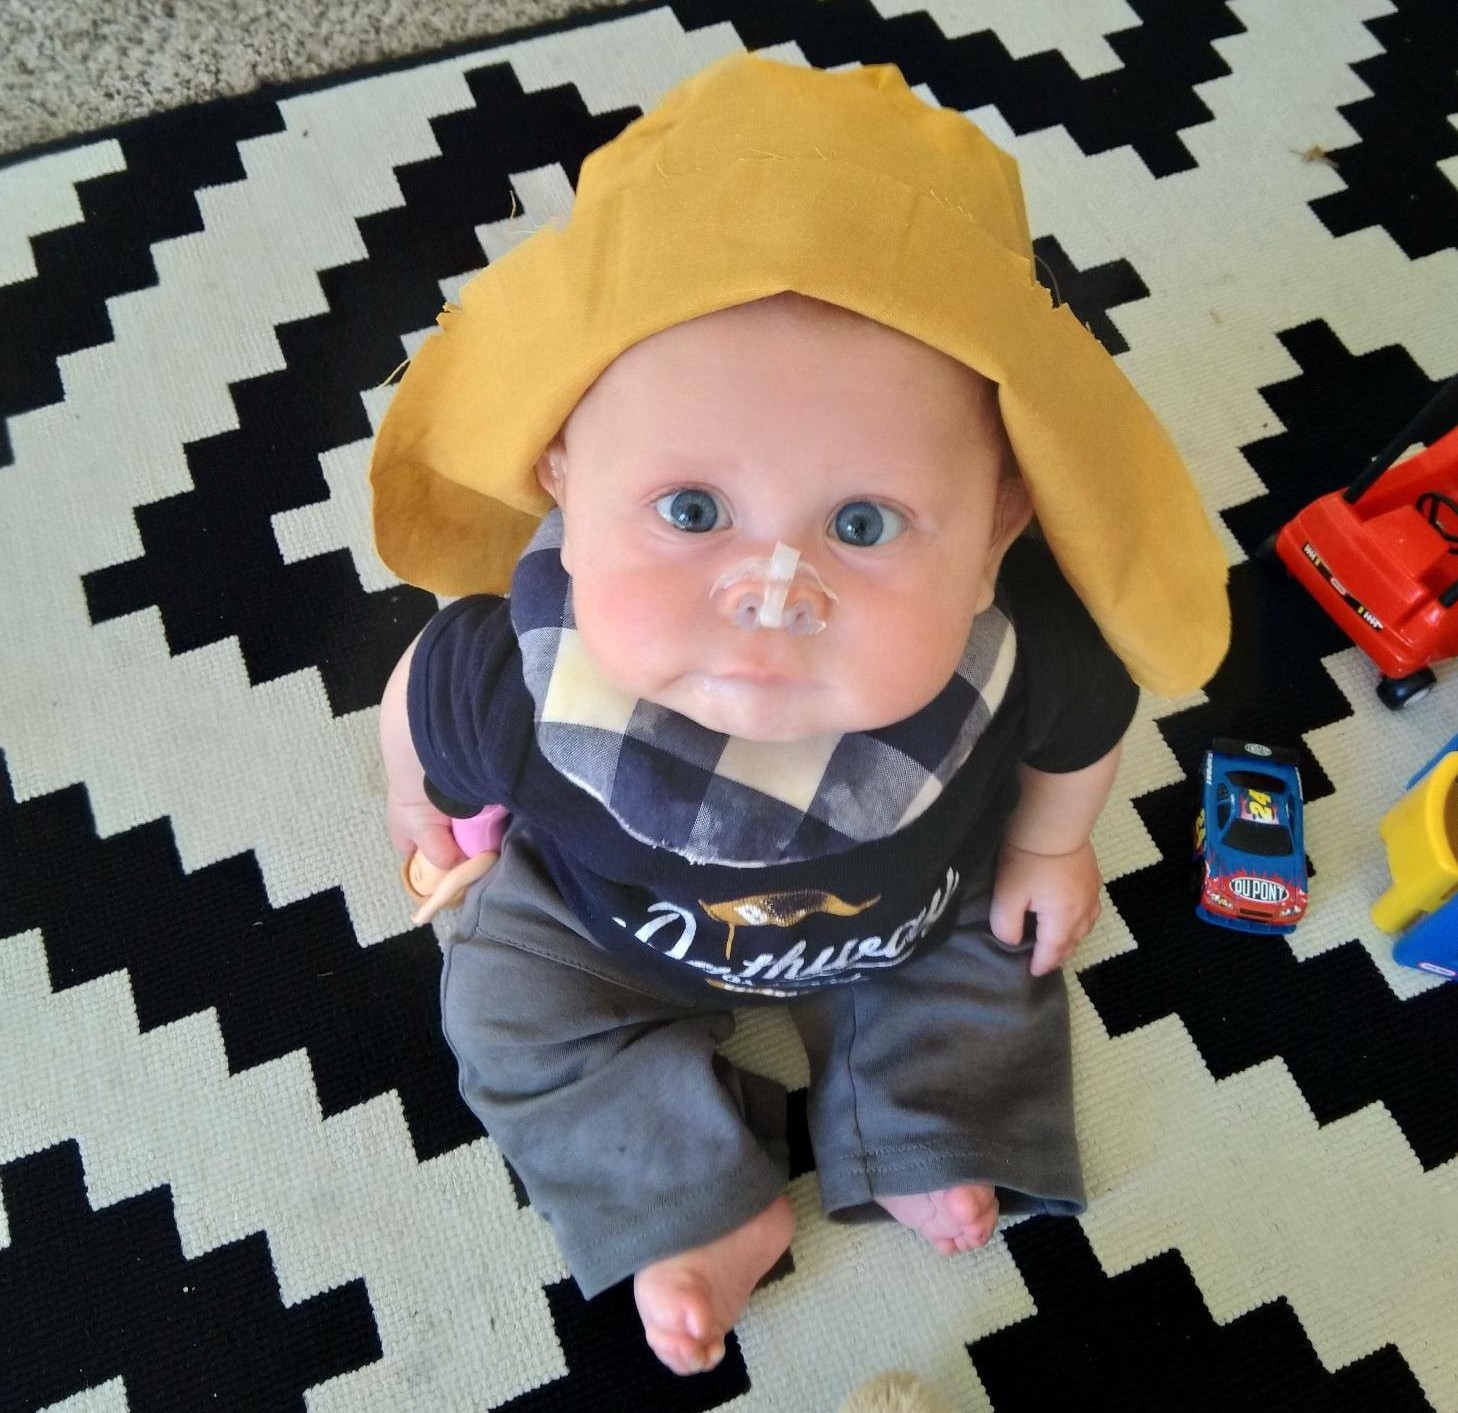 A baby who is deafblind sits on a blanket and looks up toward the camera. He wears a hat and a small device to keep his nostrils open.